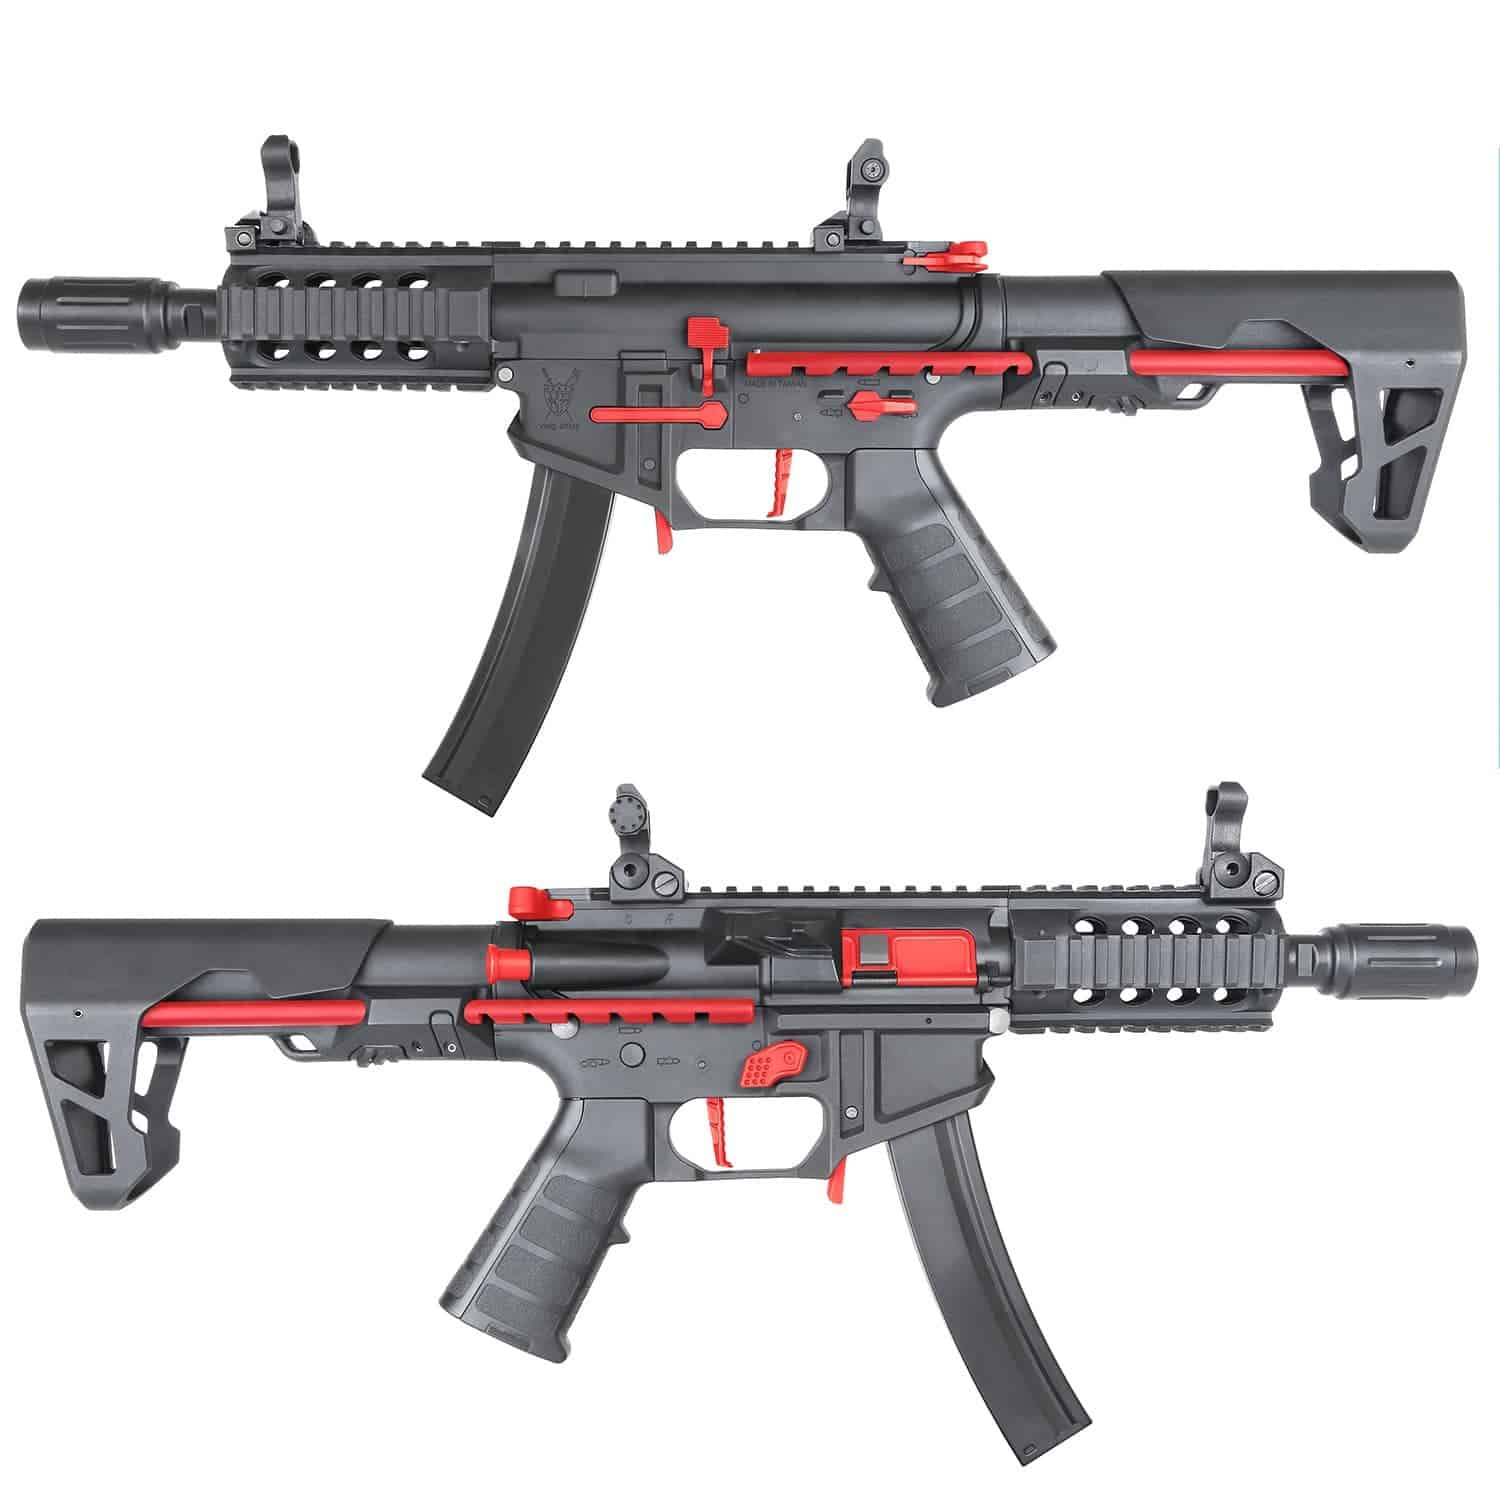 King Arms PDW 9mm SBR Shorty - Black & Red